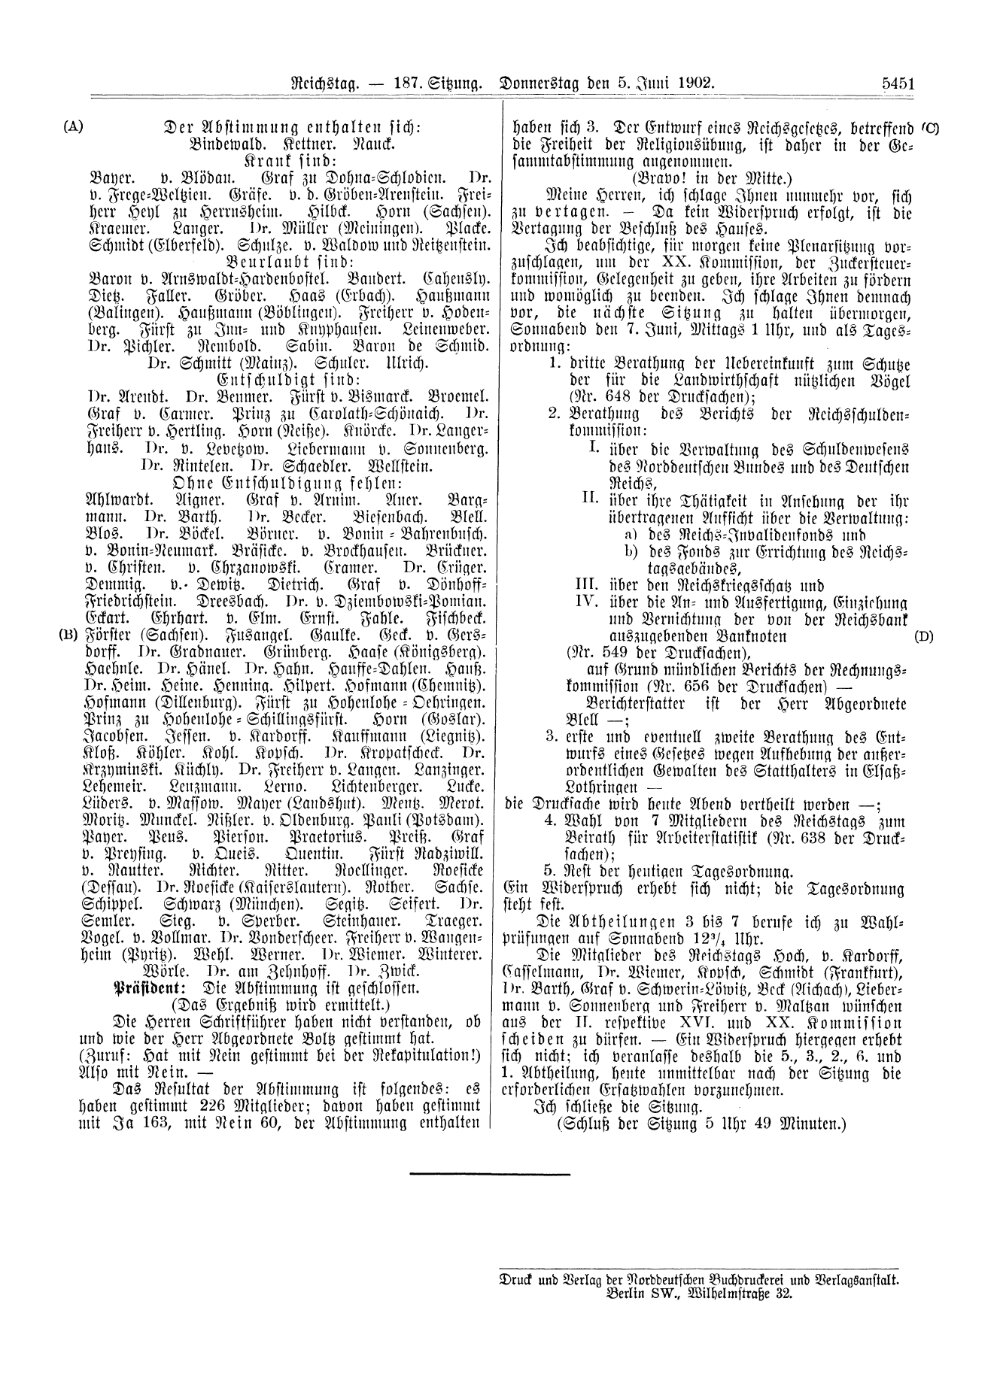 Scan of page 5451